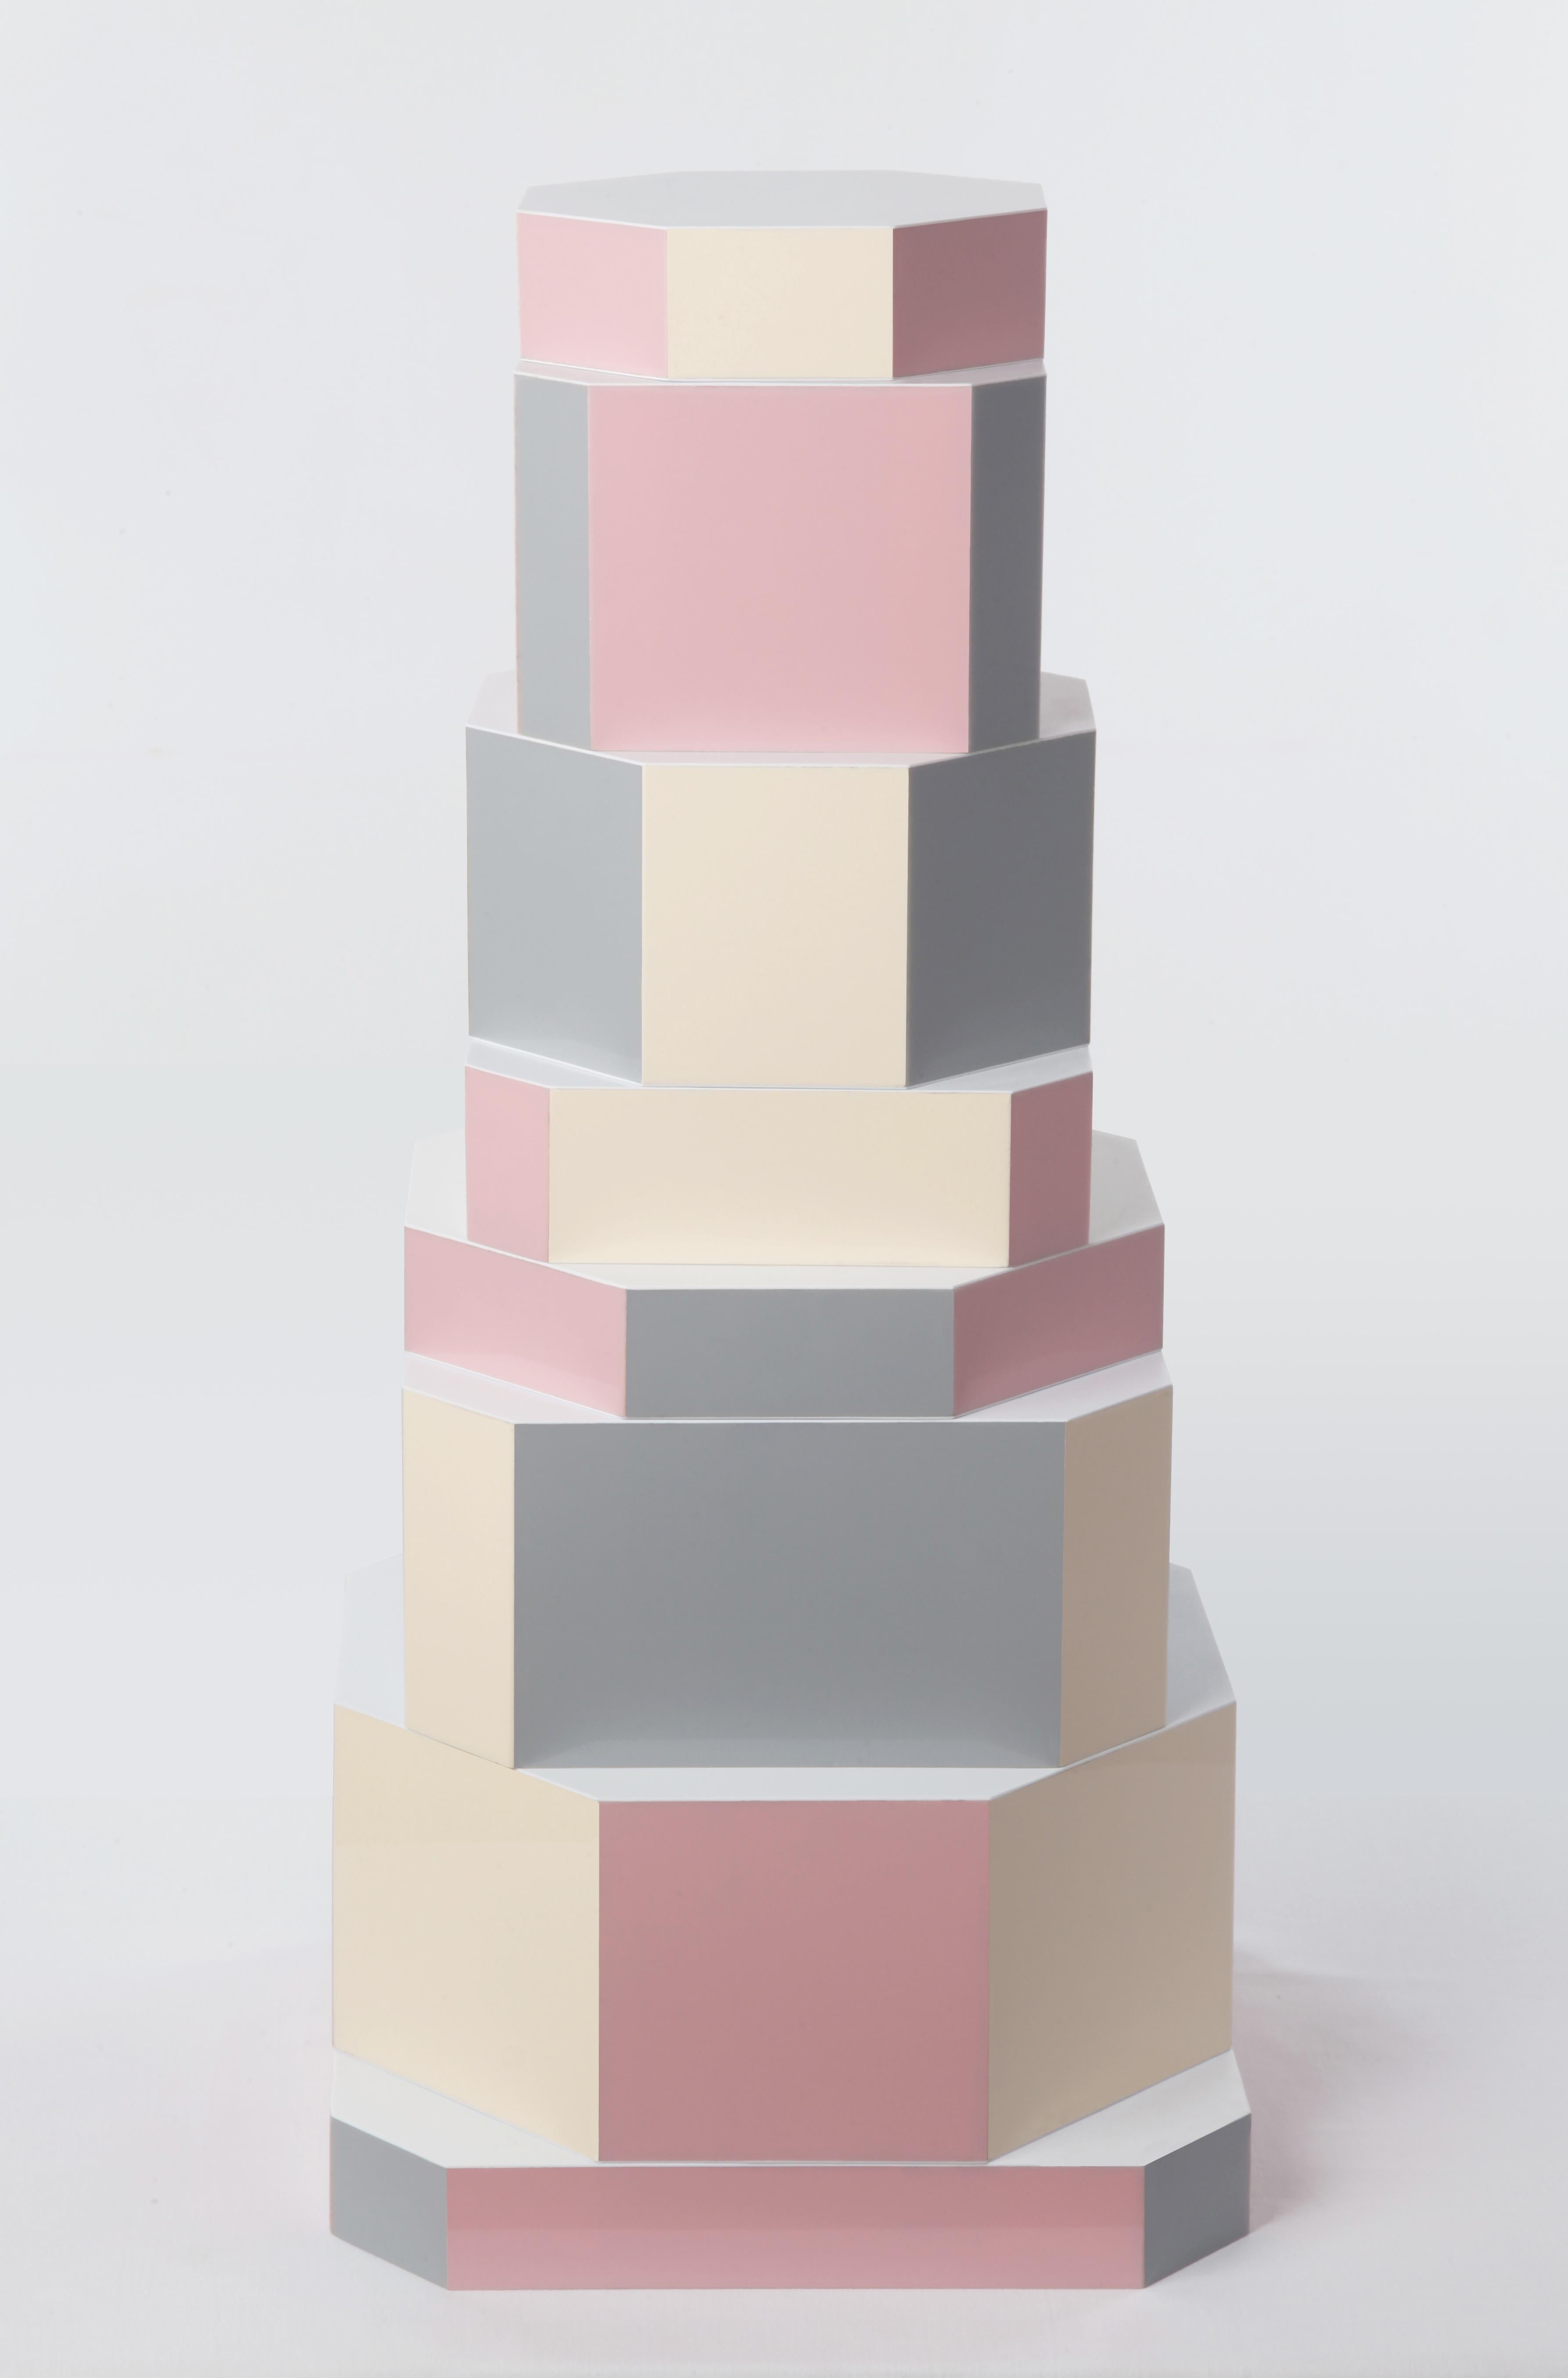 Pixel Ziggurat boxes by Oeuffice
Edition: 12 + 2AP
2012
Dimensions: 25 x 25 x 55 cm
Materials: Wood box, acrylic

The Pixel edition is a playful interpretation of the Ziggurat series that
uses a soft array of complimentary pastel colors to